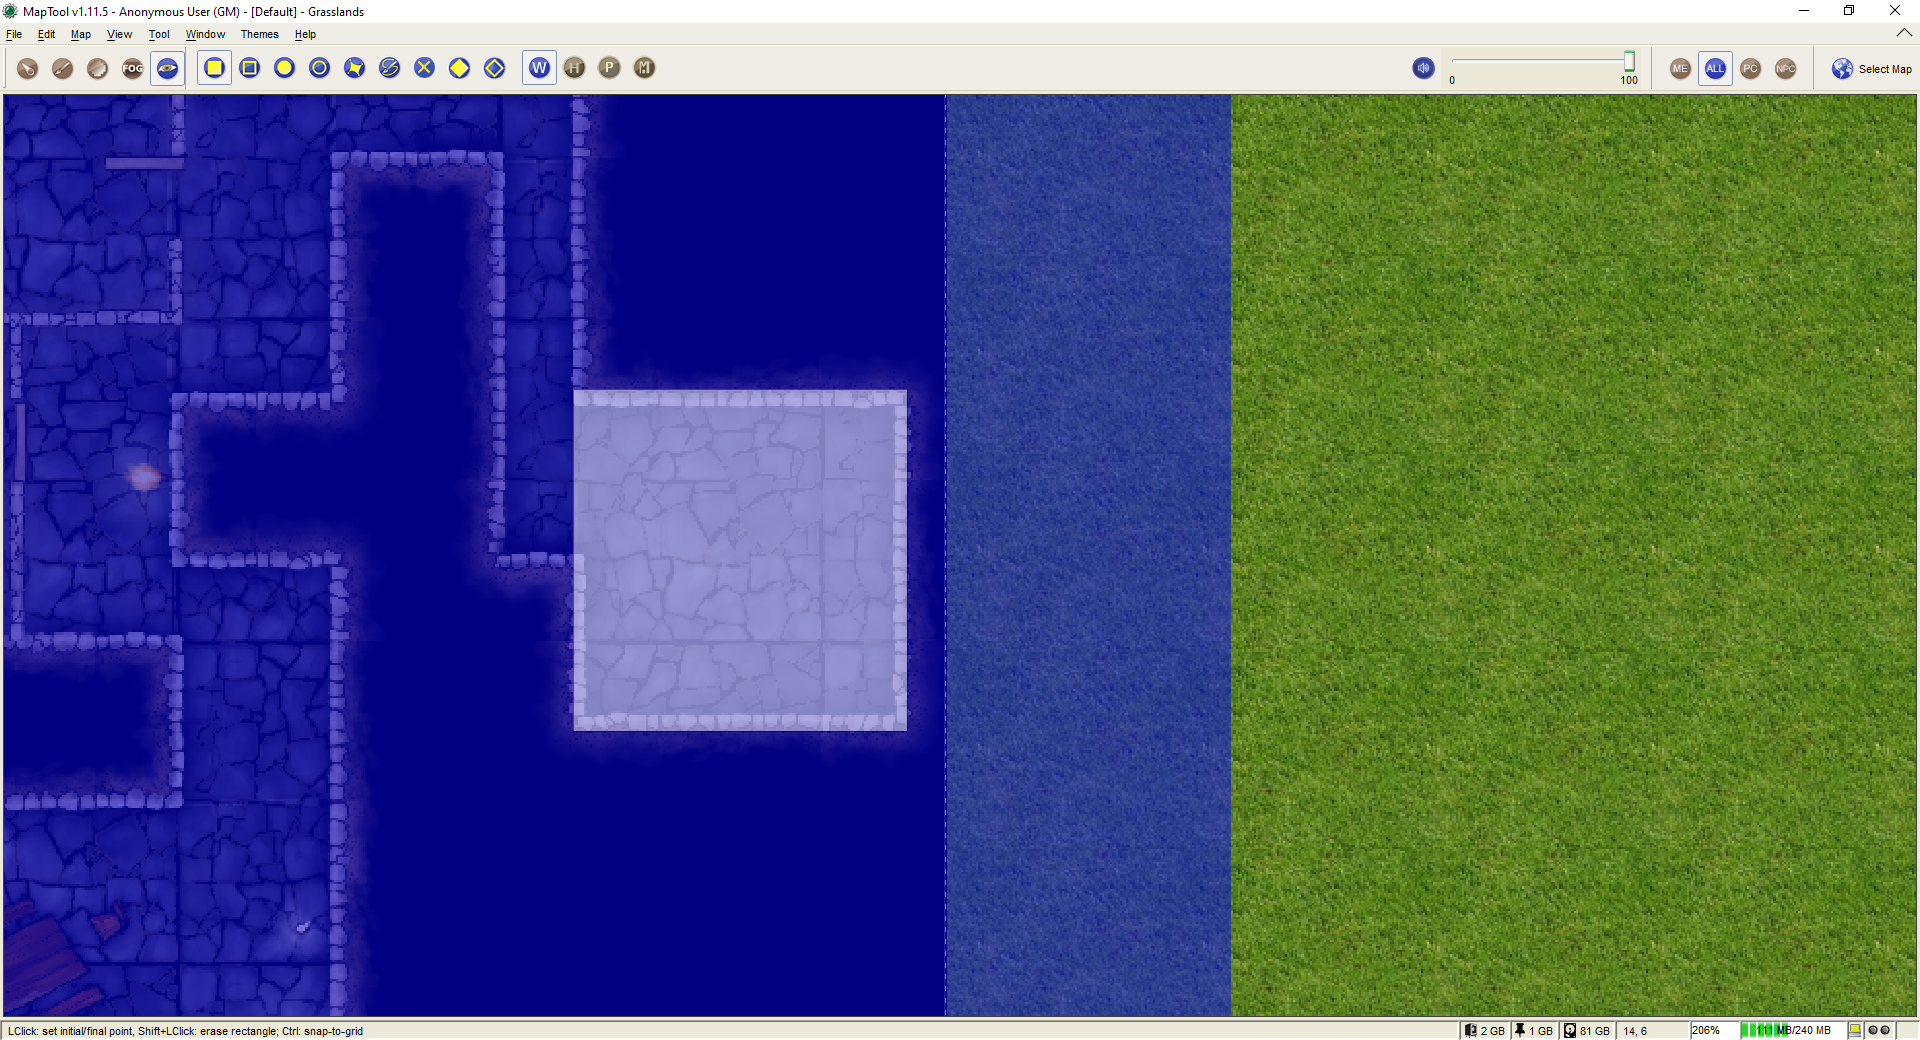 Erasing a section of VBL - hold down Ctrl to make the area snap to the map grid.